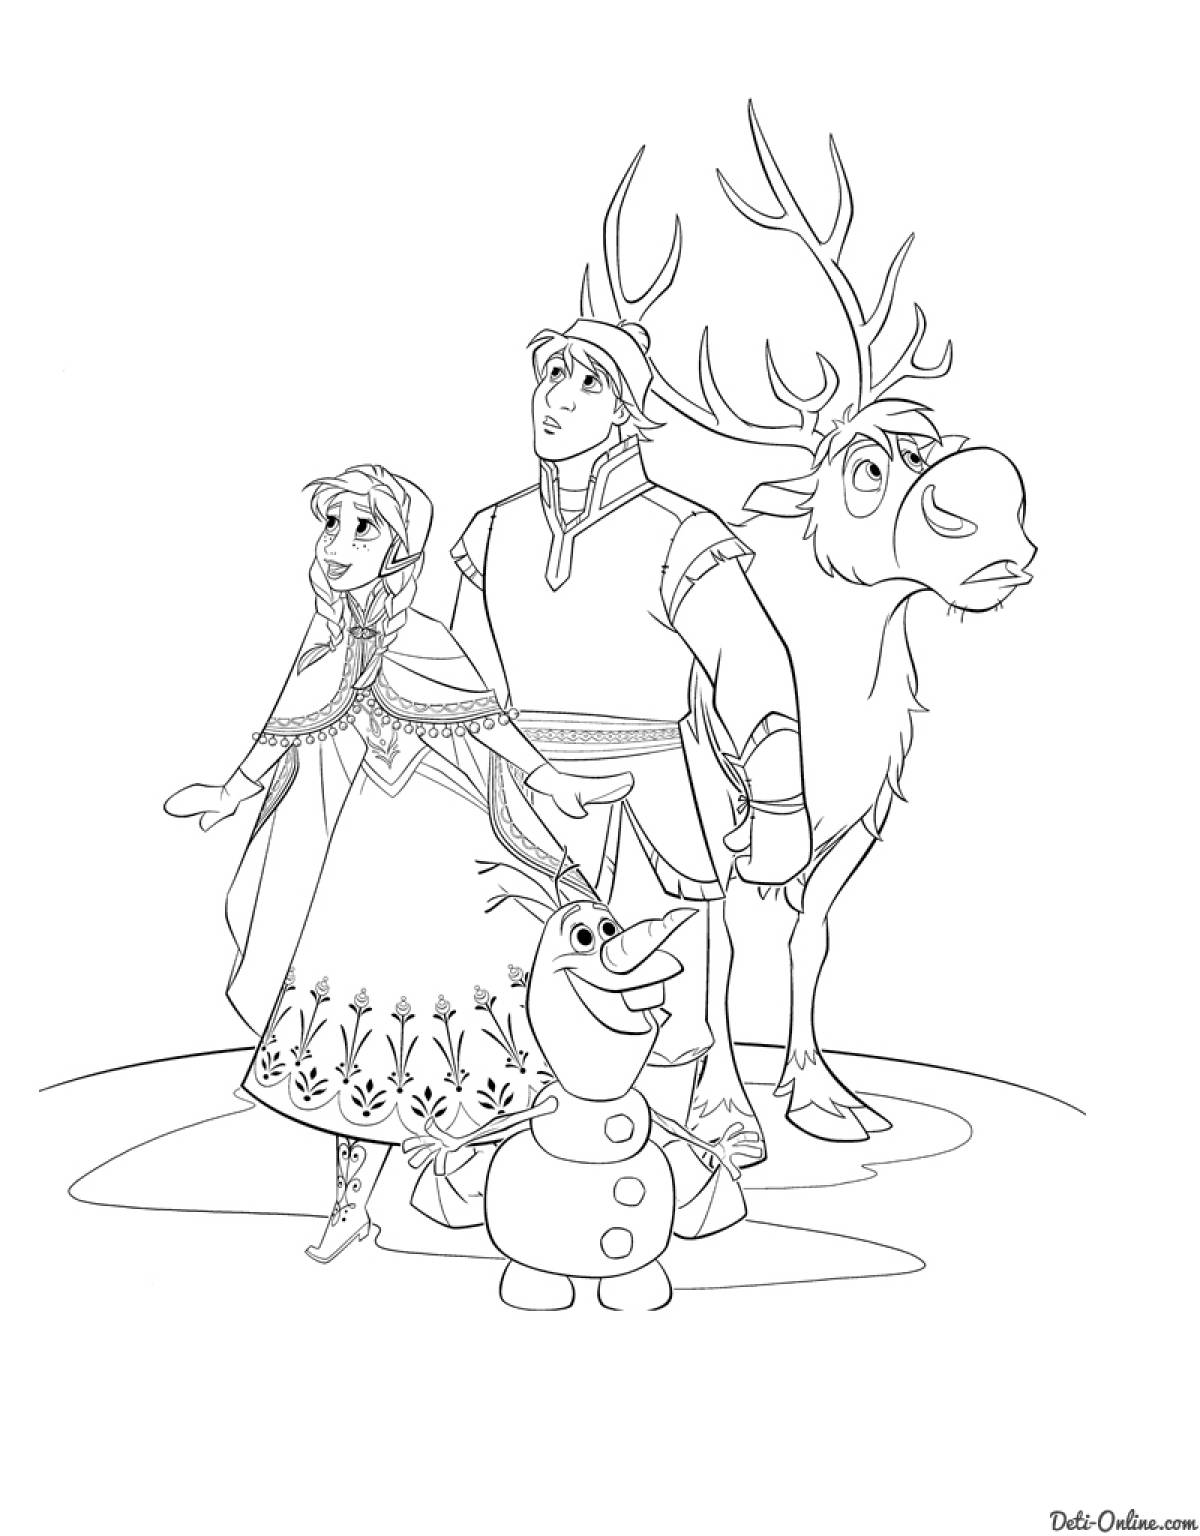 Frozen cartoon characters coloring page